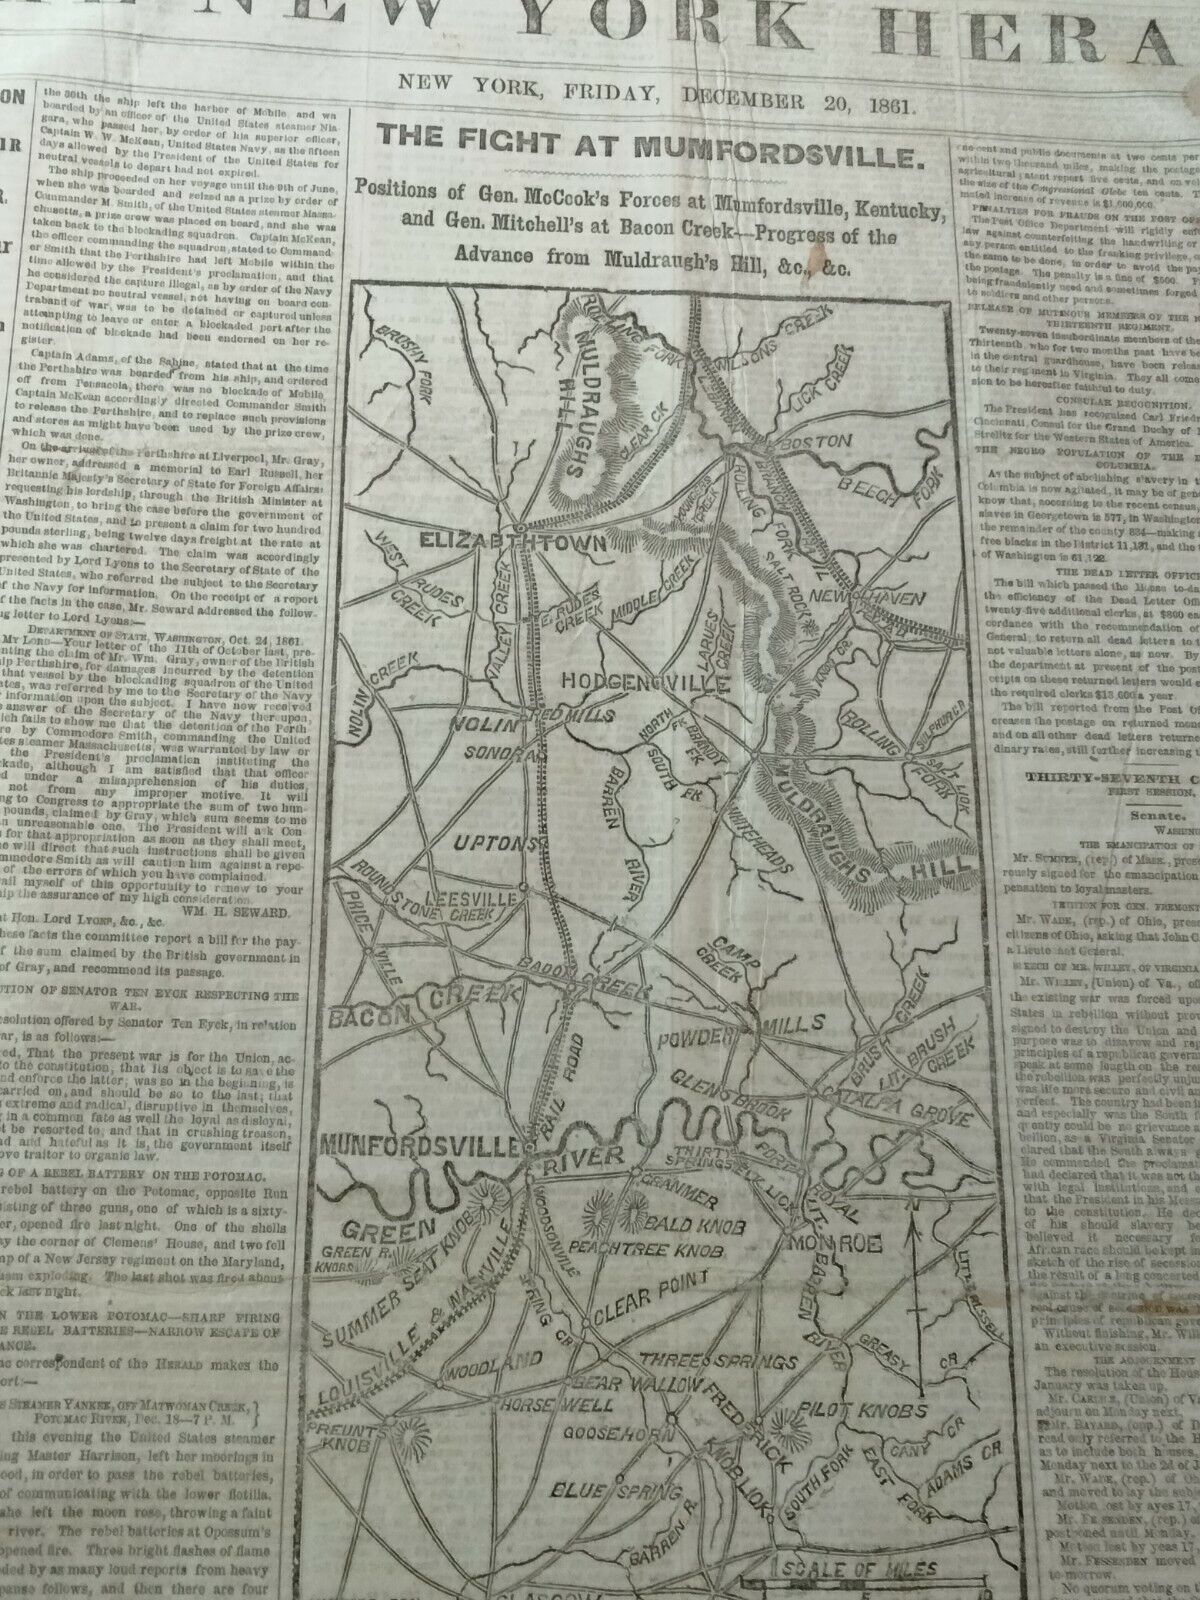 Civil War Newspapers- BRILLIANT VICTORY AT MUMFORDSVILLE, KY, POINT OF THE ROCKS